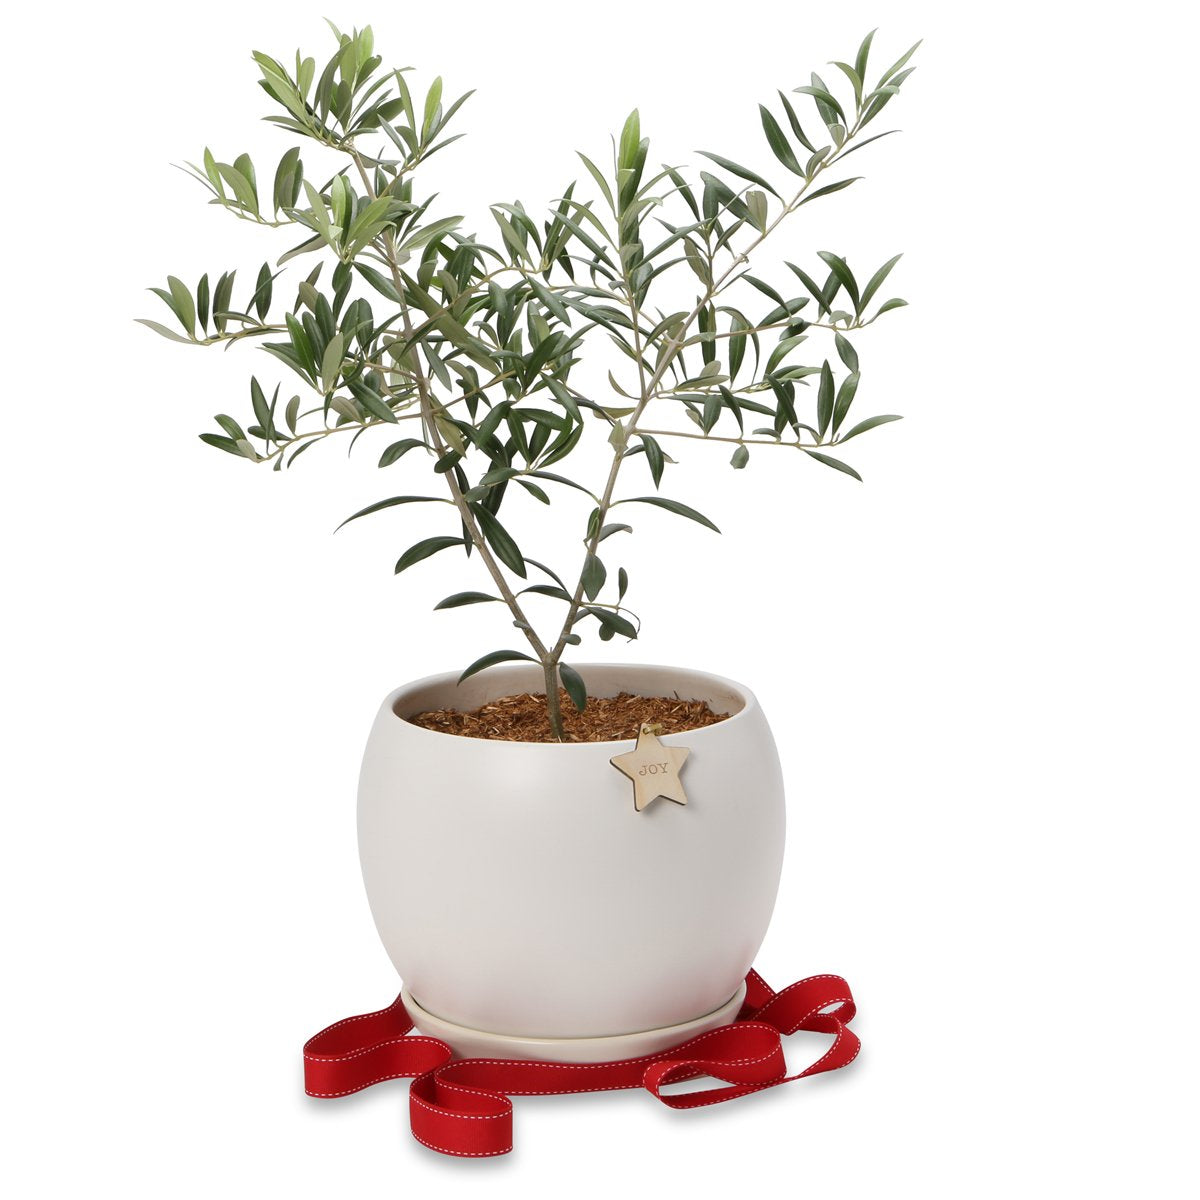 Potted Olive Christmas trees